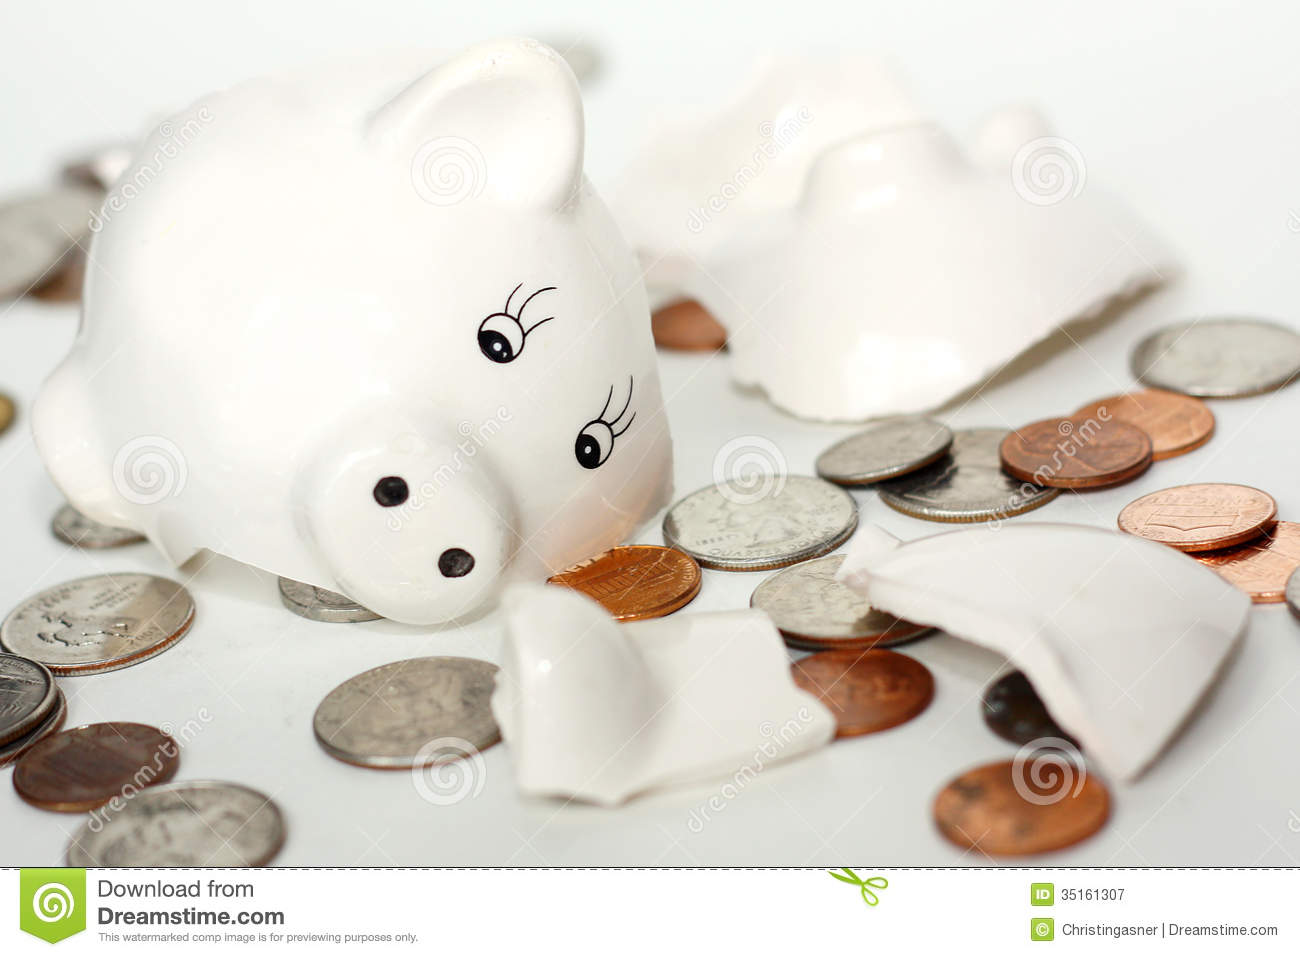 Broken Small Piggy Bank Surrounded By Spilled Coin Royalty Free Stock